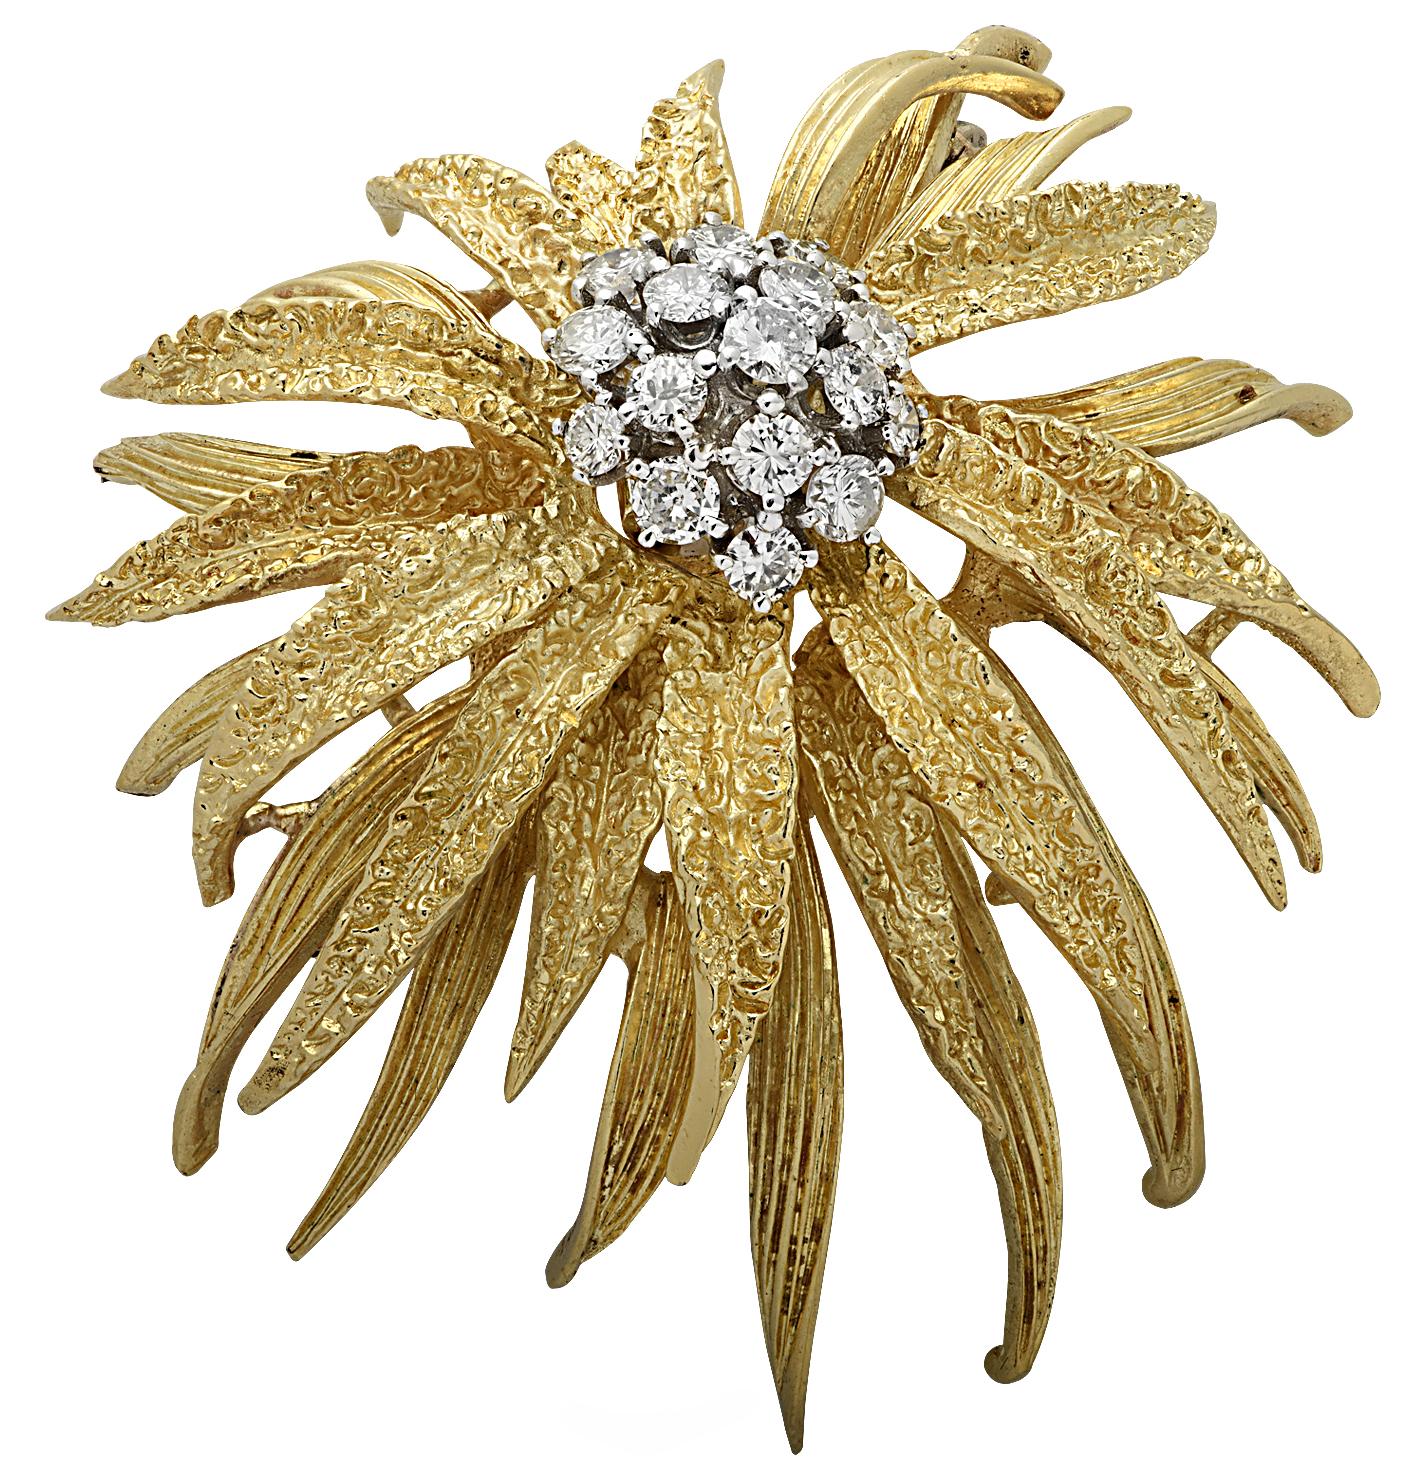 Striking En Tremblant brooch pin crafted in 18 karat yellow gold featuring 16 round brilliant cut diamonds weighing approximately 1.5 carats total, H color, SI clarity. This delightful brooch pin is fashioned into a flower with layers of textured